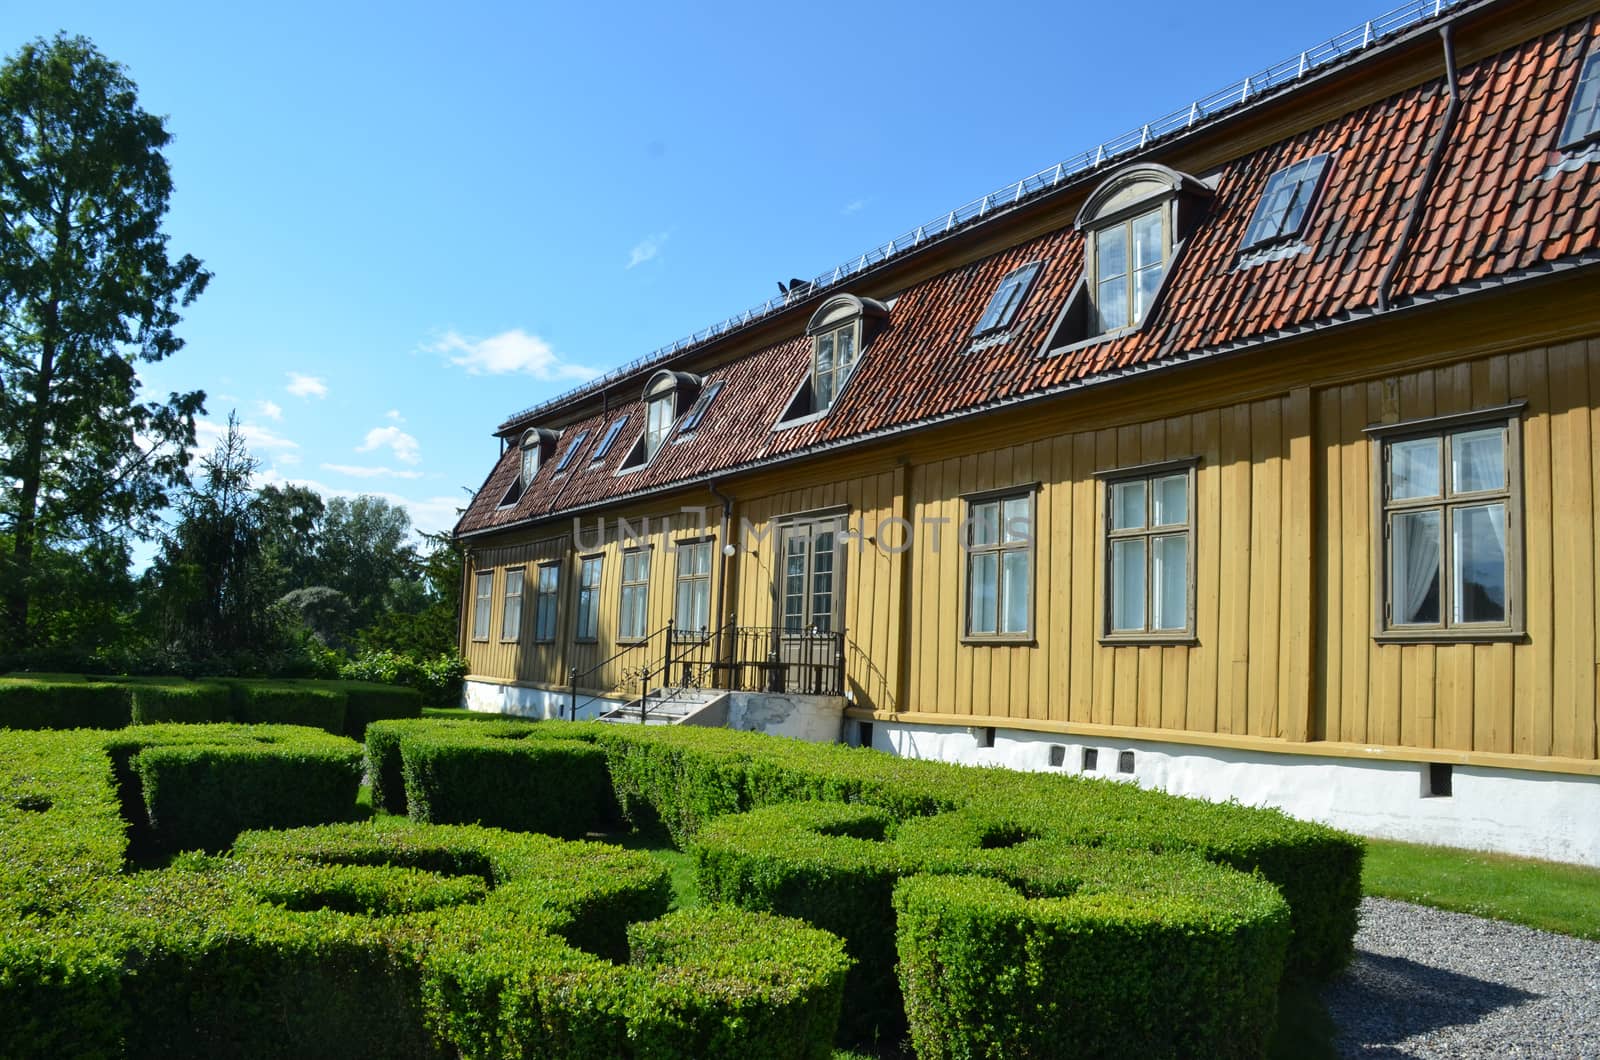 Tøyen Manor (Norwegian: Tøyen Hovedgård) is located in The University Botanical Garden at Tøyen in Oslo. Tøyen Manor is the University of Oslo's oldest building, and was given as a gift in 1812. The main house was built in 1679 and is believed to be Oslo’s oldest timber building.